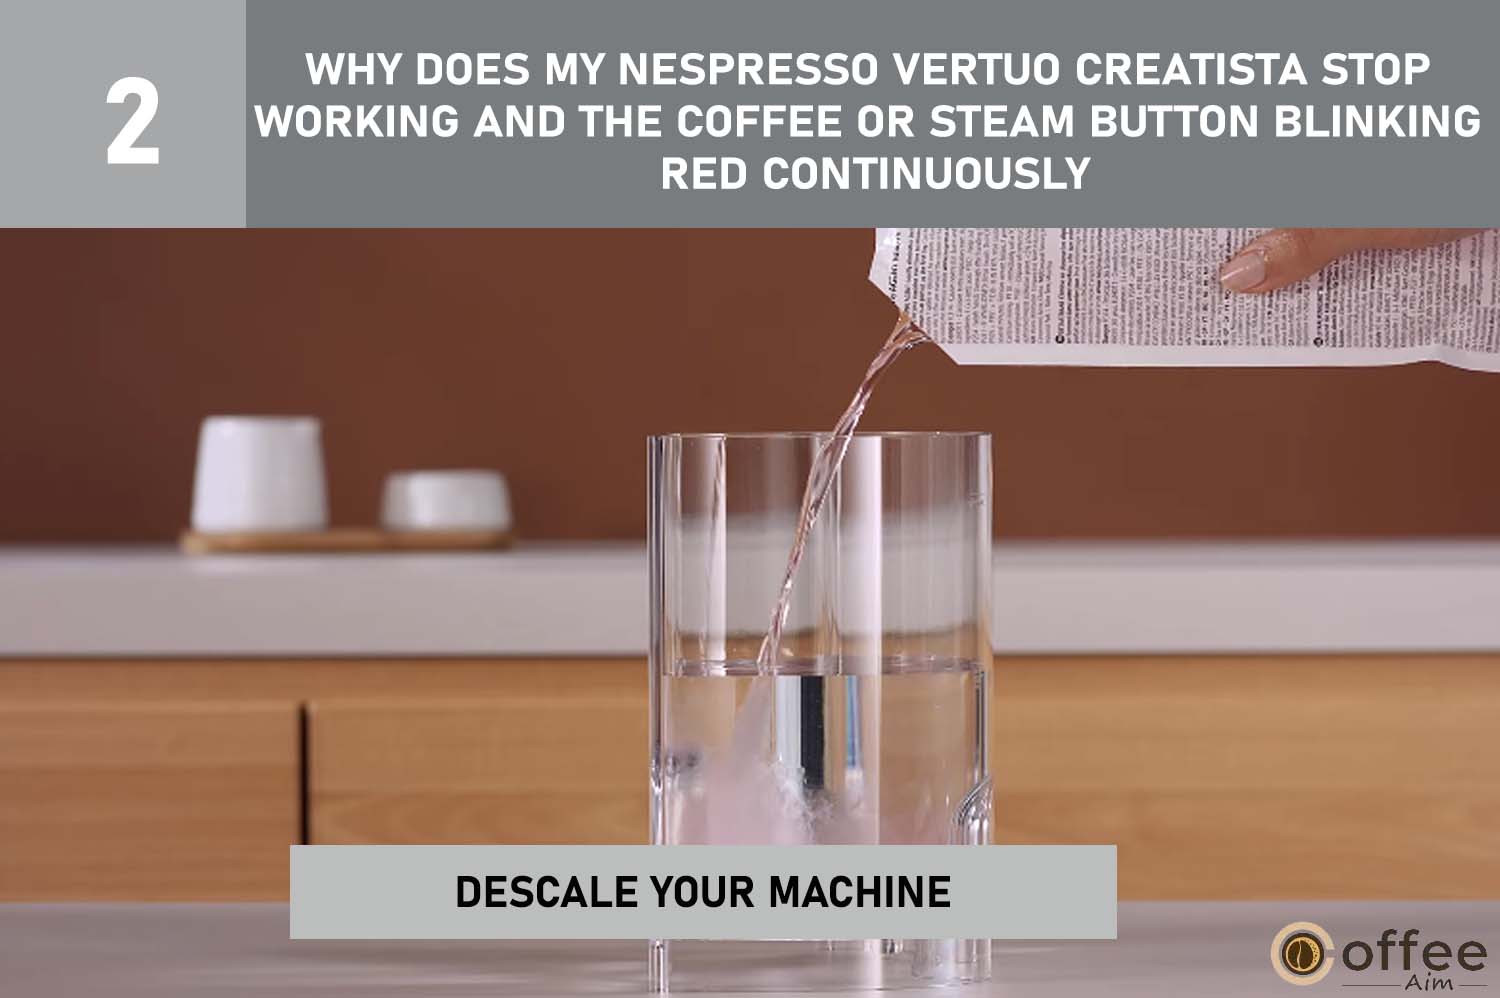 
To fix a Nespresso Vertuo Creatista with a blinking red light, descale the machine. Follow simple steps in the article guide.